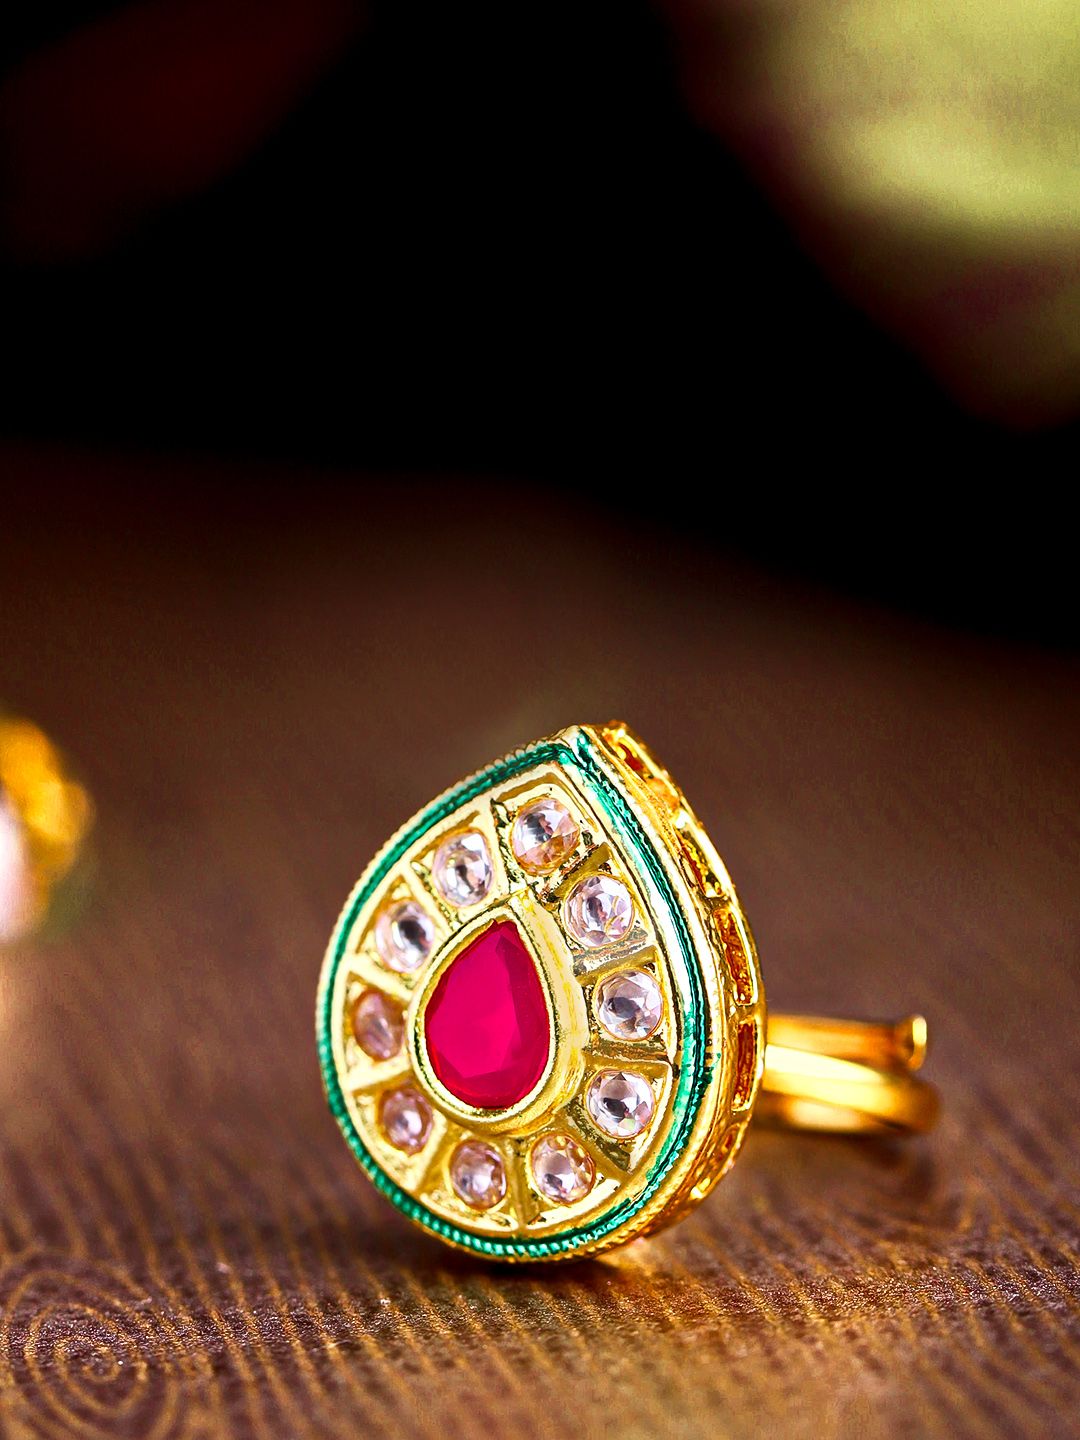 Priyaasi Red Gold-Plated Kundan-Studded Handcrafted Teardrop Shaped Adjustable Finger Ring Price in India